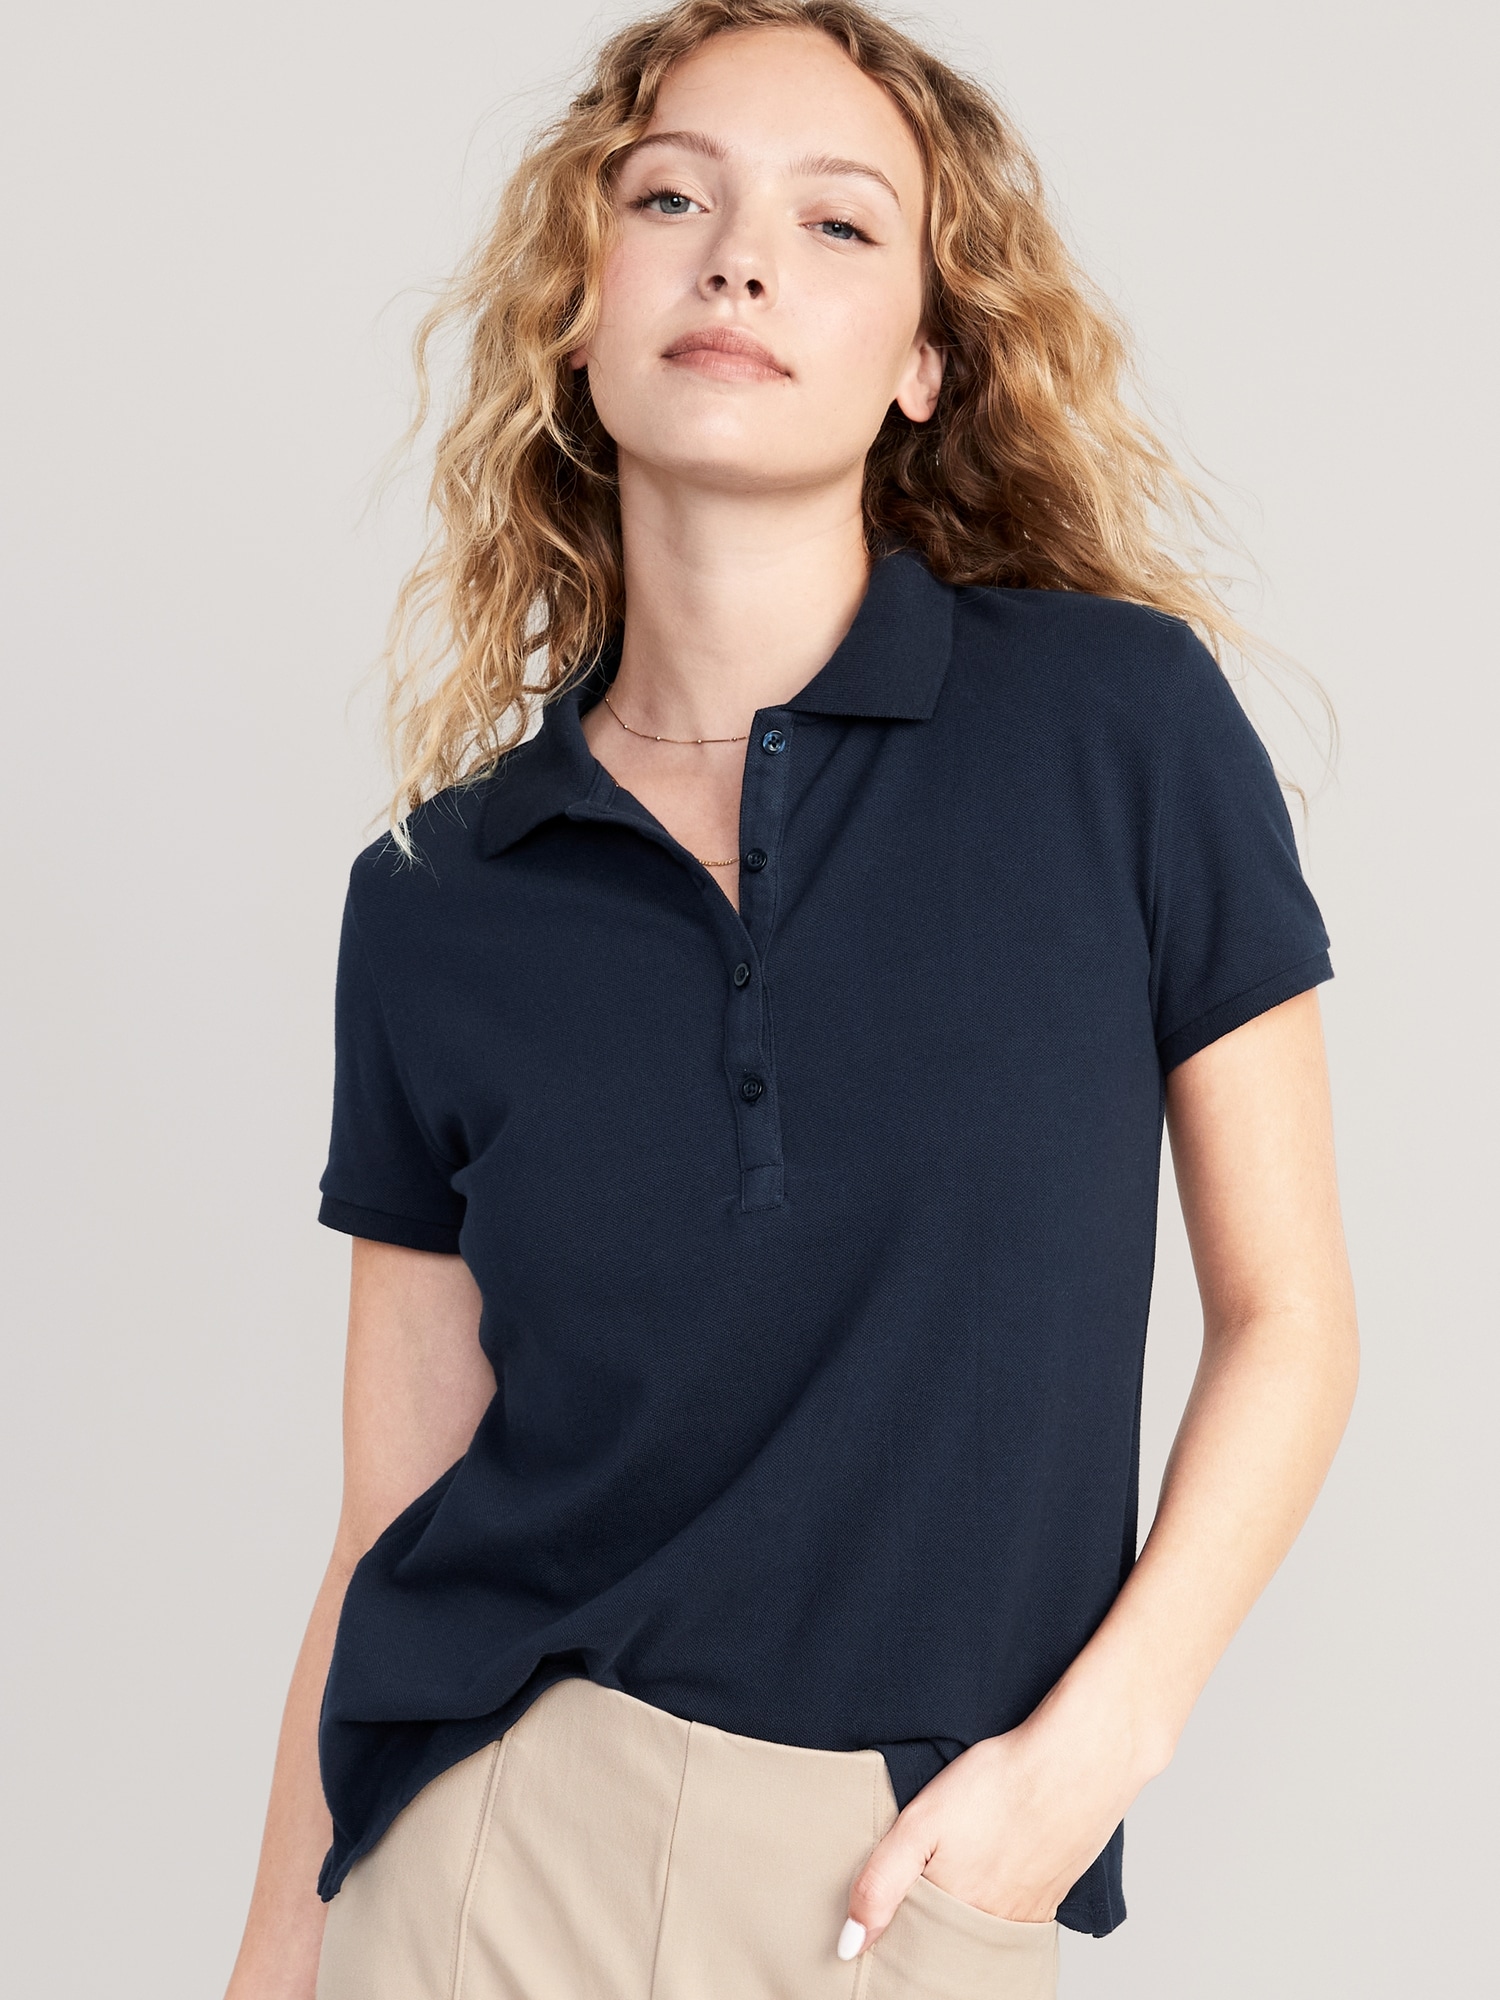 Women\'s Athletic Polo Shirts Navy Old 